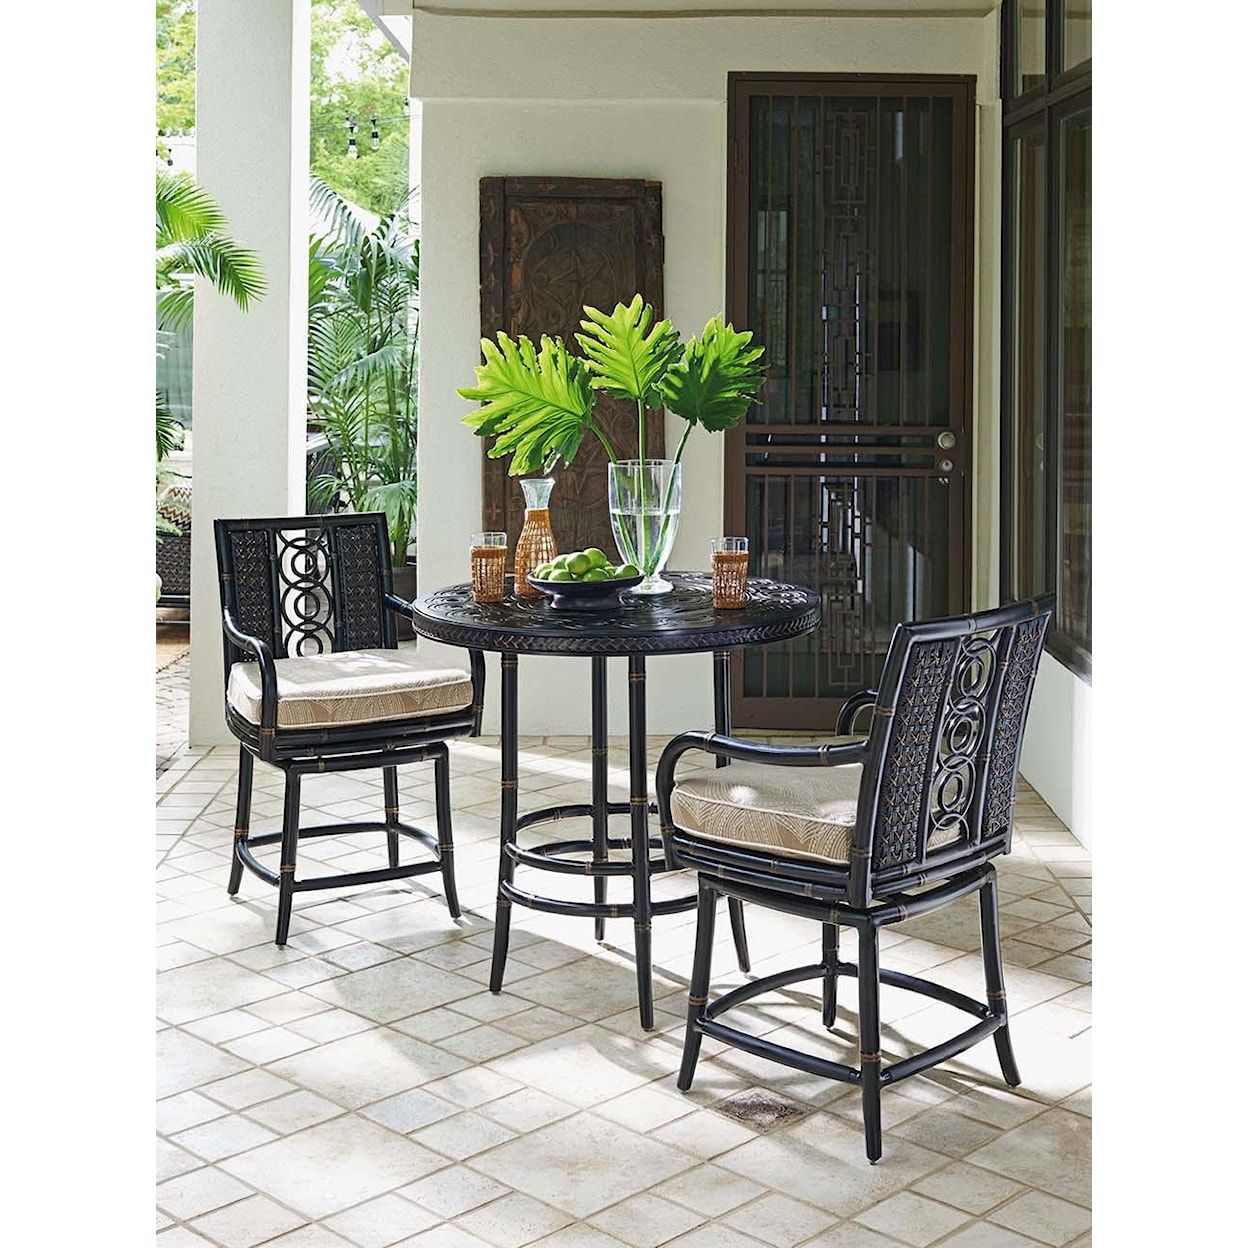 Tommy Bahama Outdoor Living Marimba High/Low Bistro Table